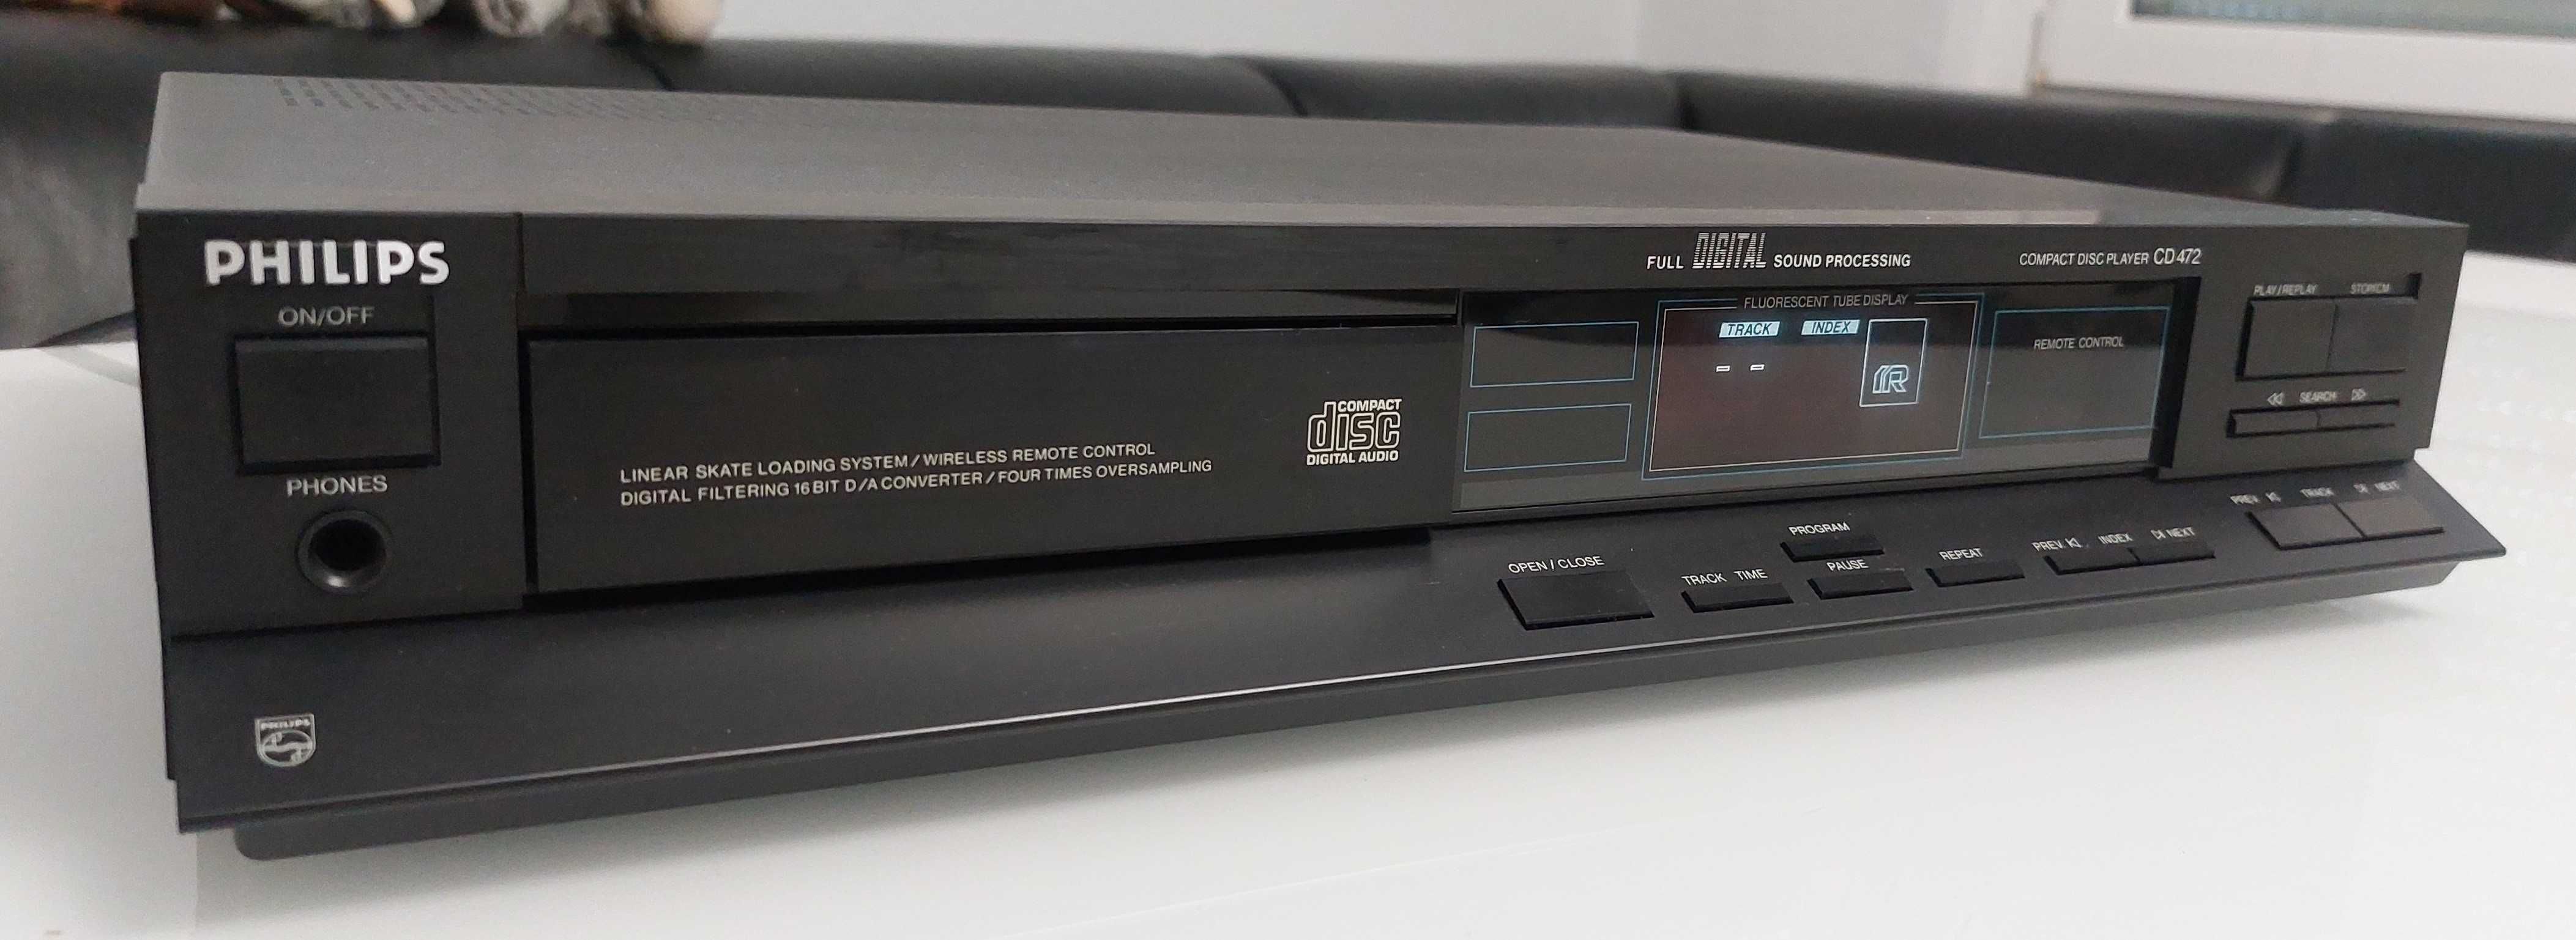 CD Player Philips CD 472 (TDA-1541)